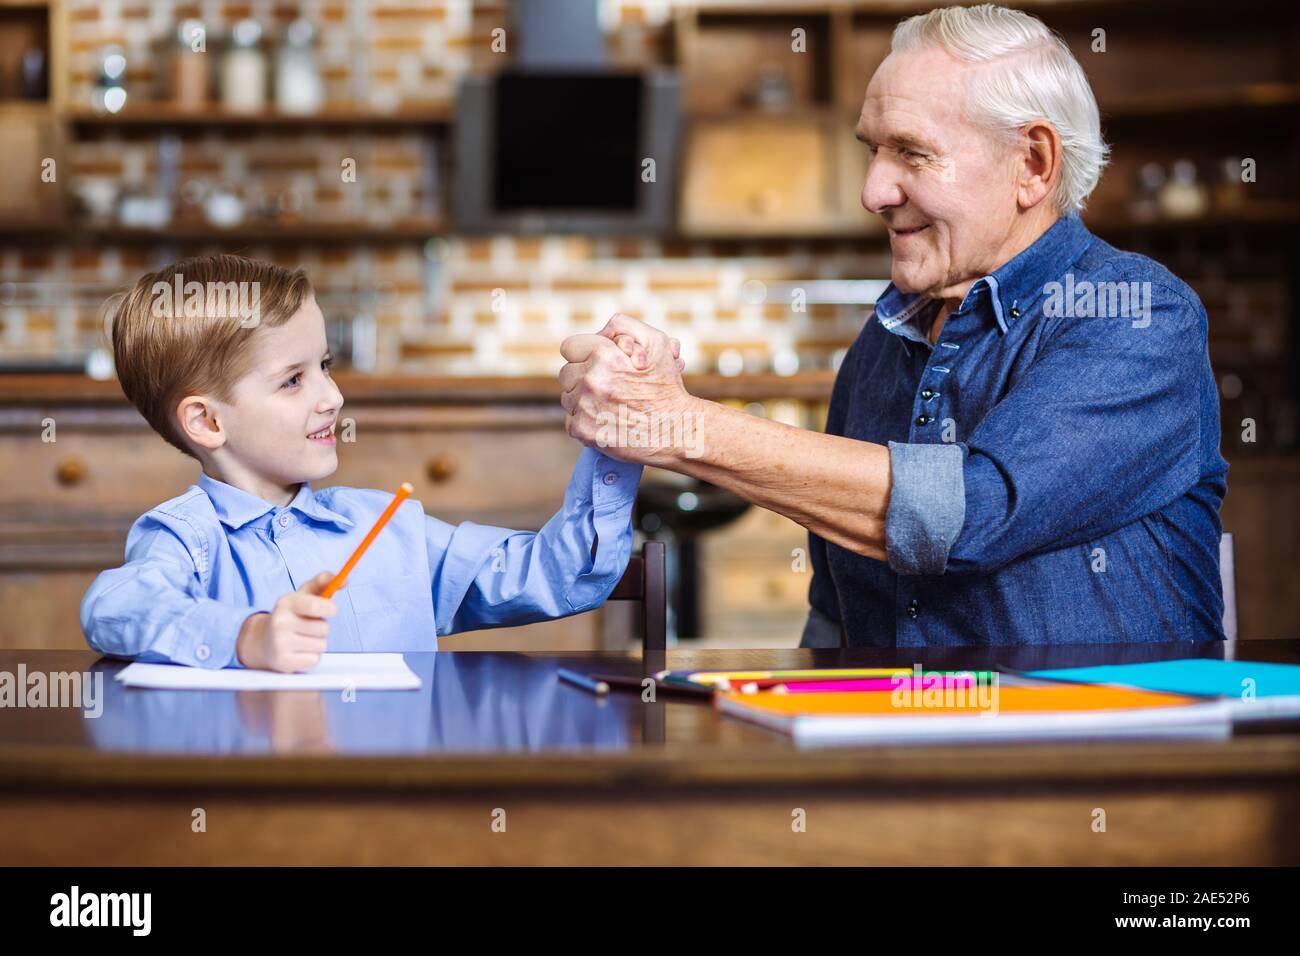 Cheerful little boy and his grandfather shaking hands Stock Photo